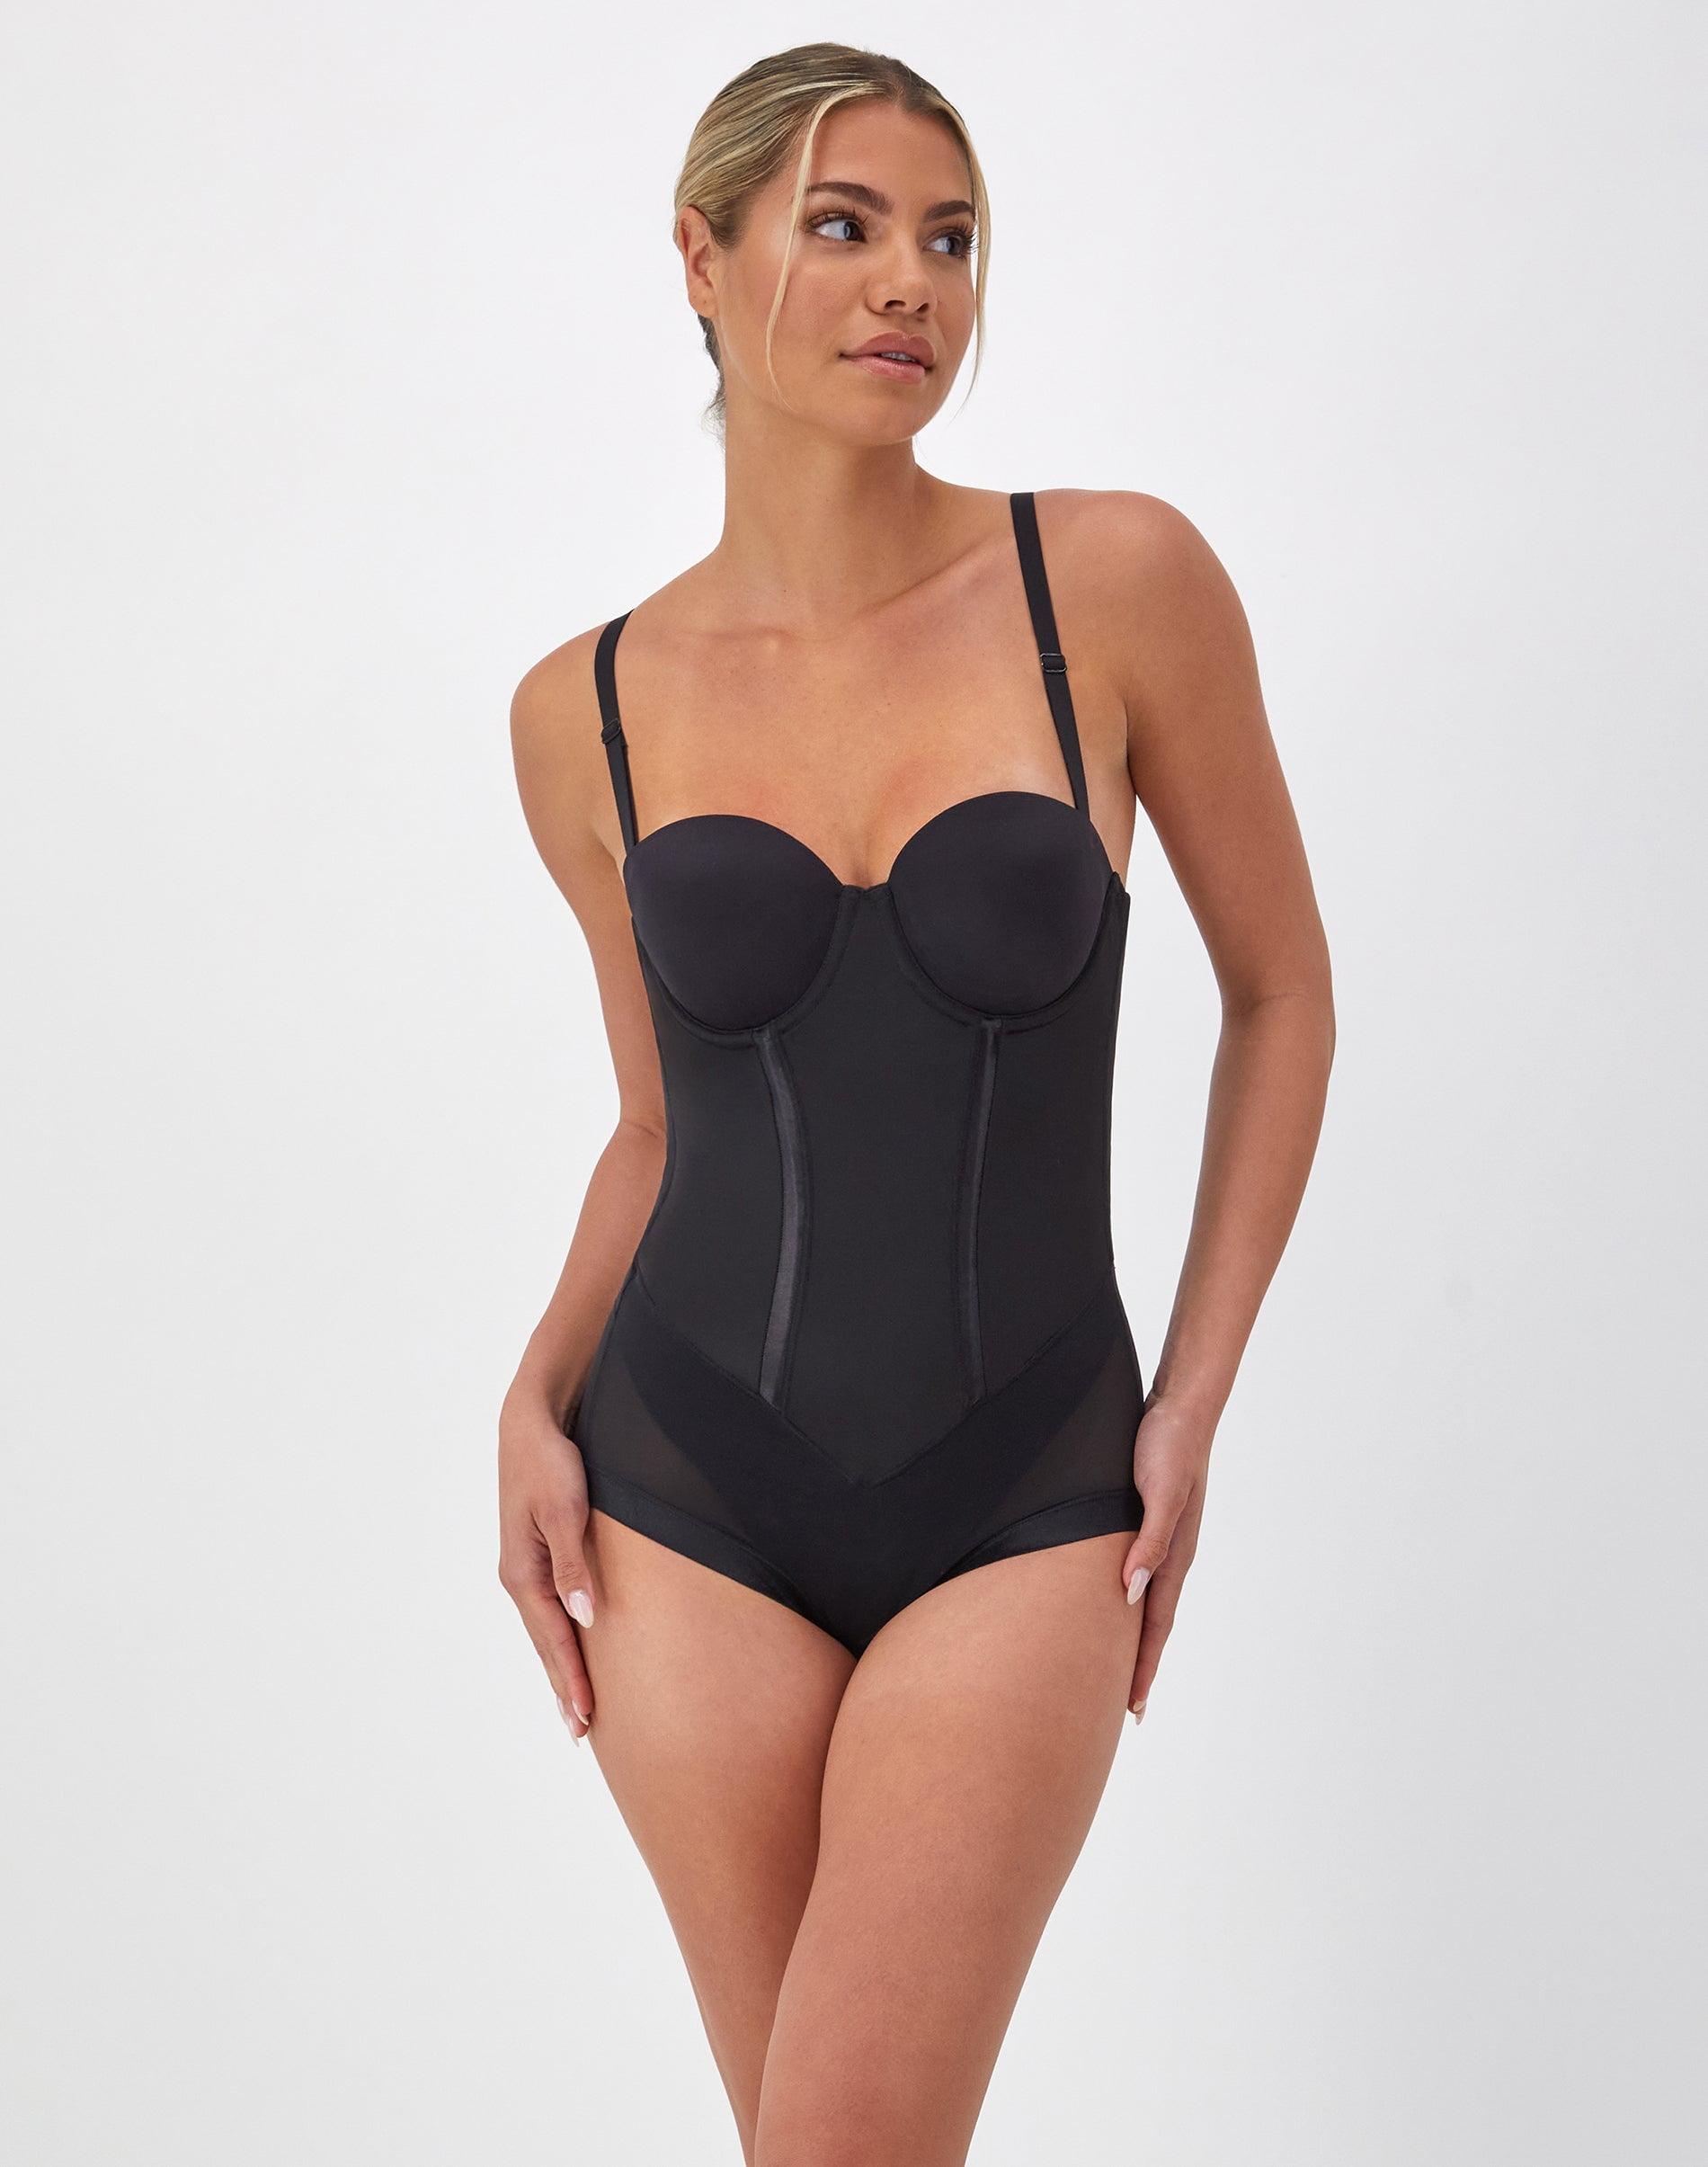 Ultra-Firm Convertible Body Shaper with Built-In Underwire Bra